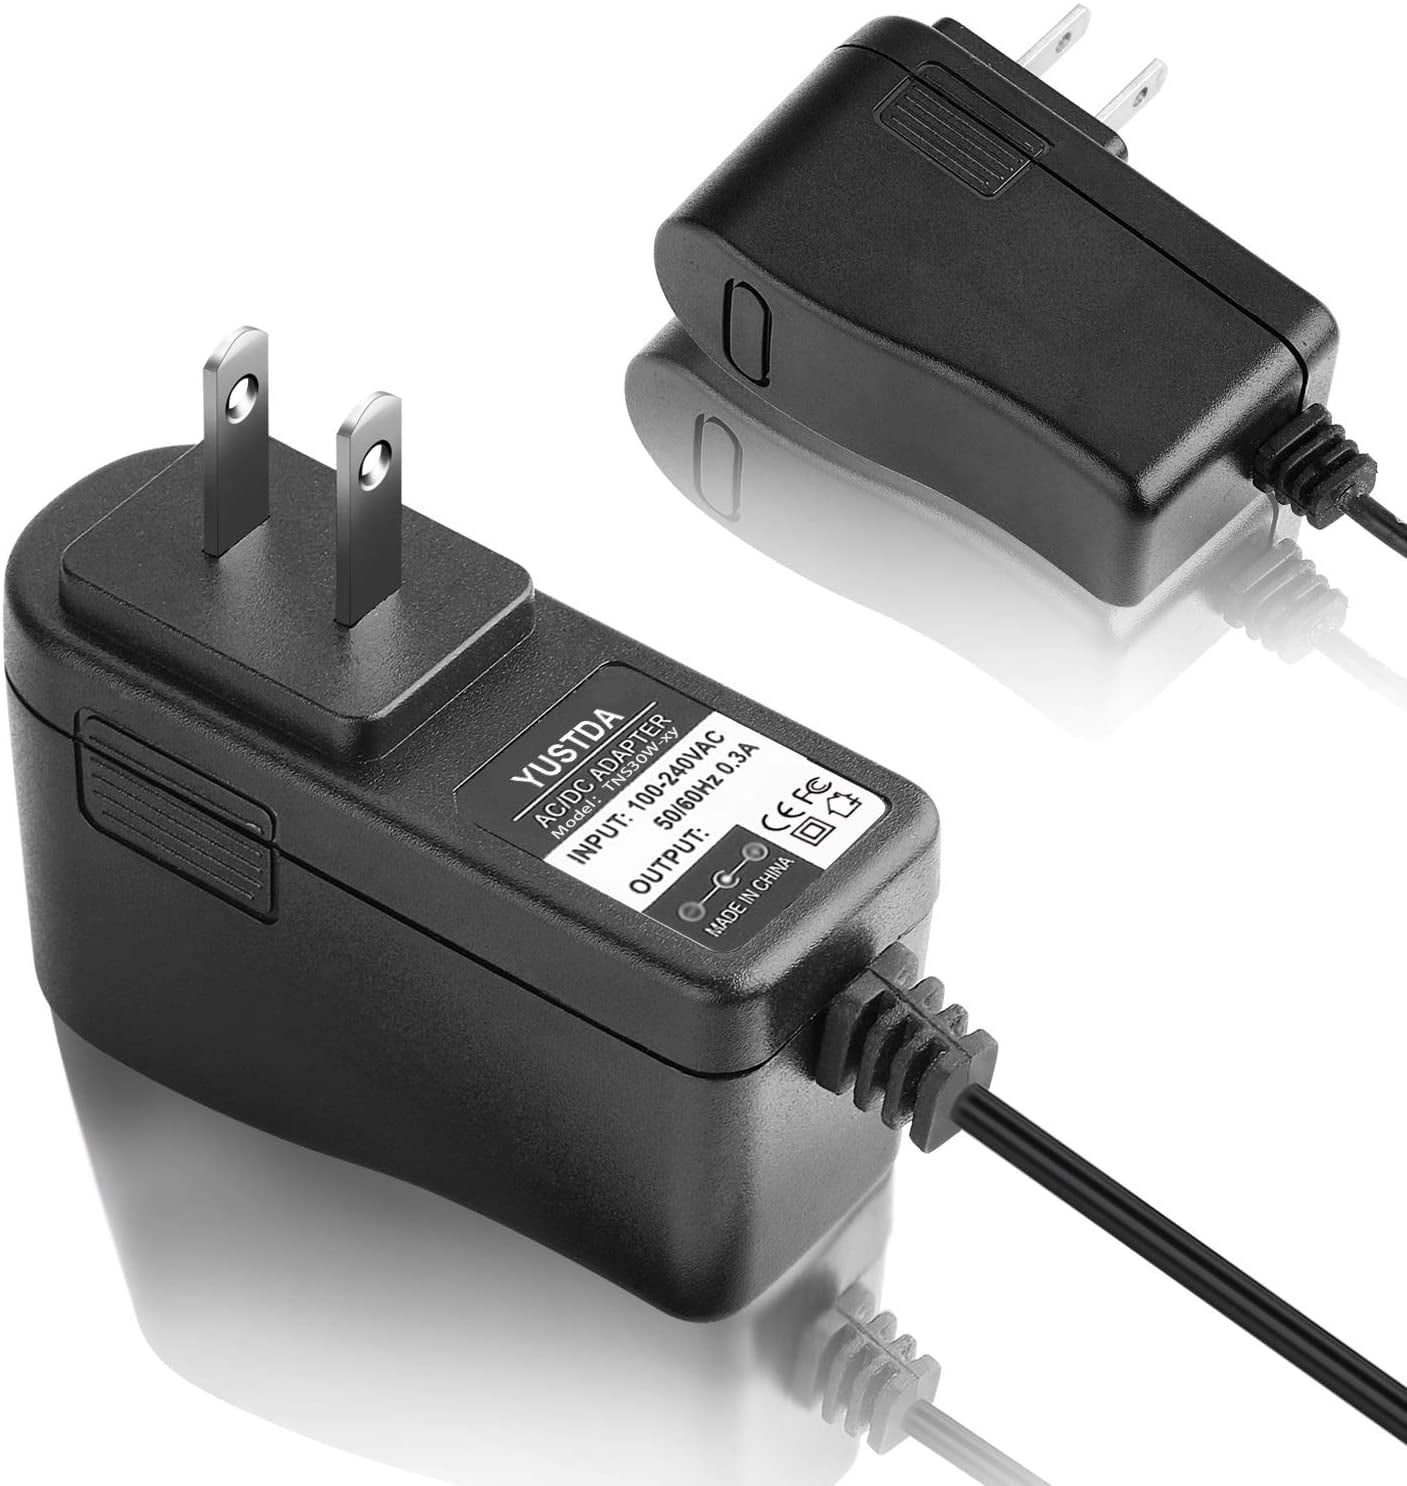 Yustda AC/DC Adapter Replacement for Model:S01-120050U 12V DC